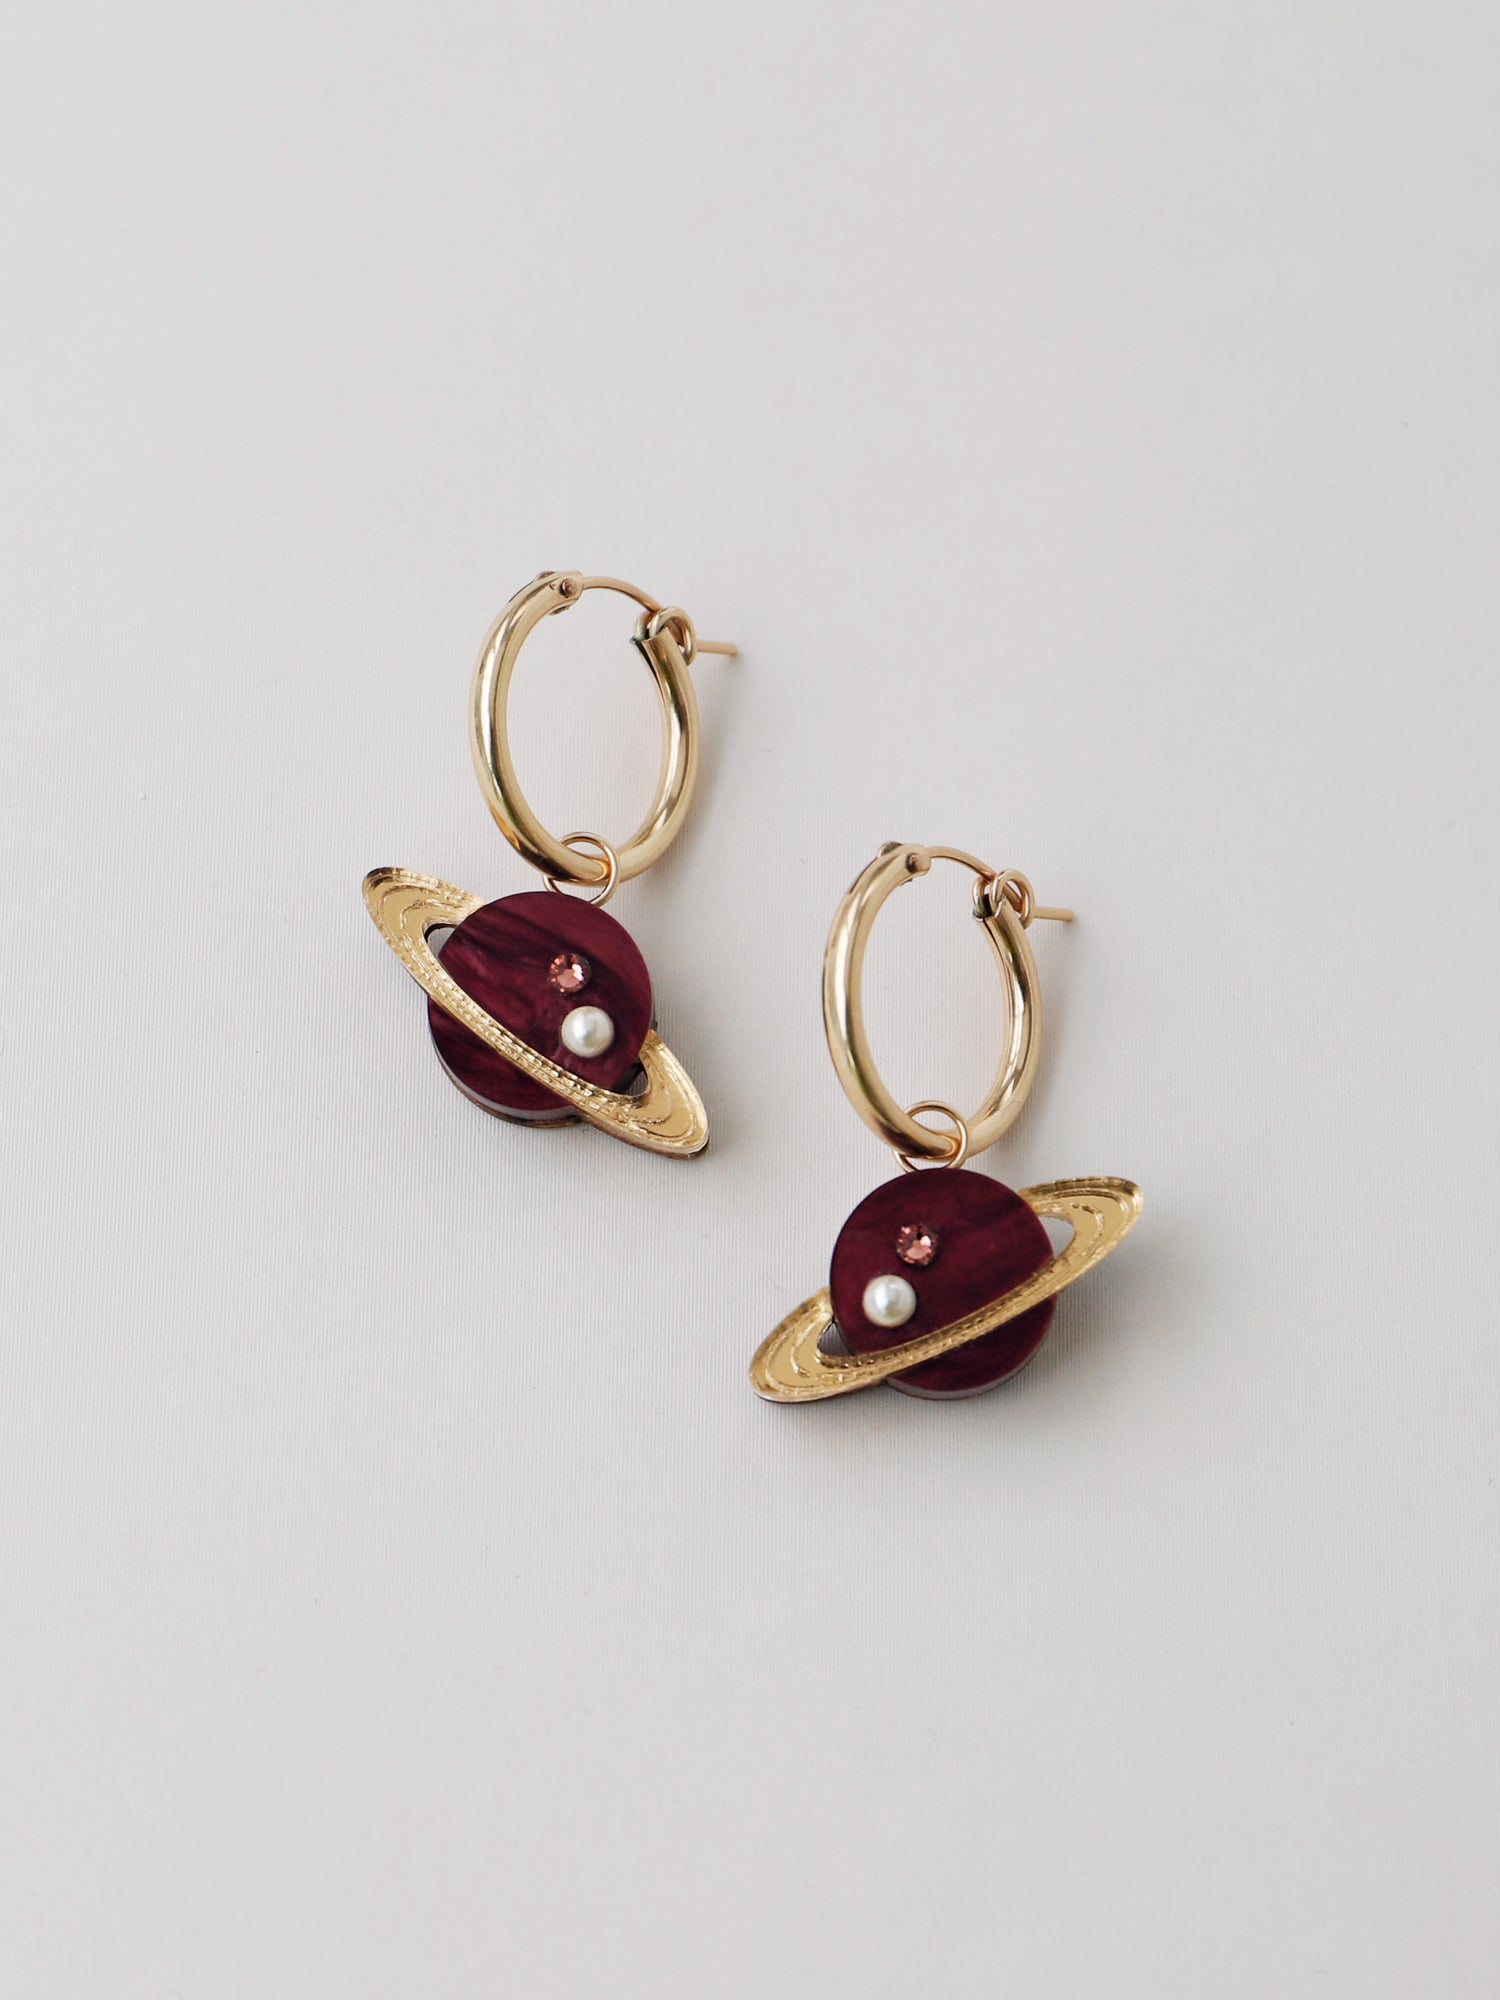 Saturn charm hoops in pearlescent cherry acrylic, embellished with high quality glass pearls & crystals. Wear with our gold-filled hoops. Handmade in London by Wolf & Moon.